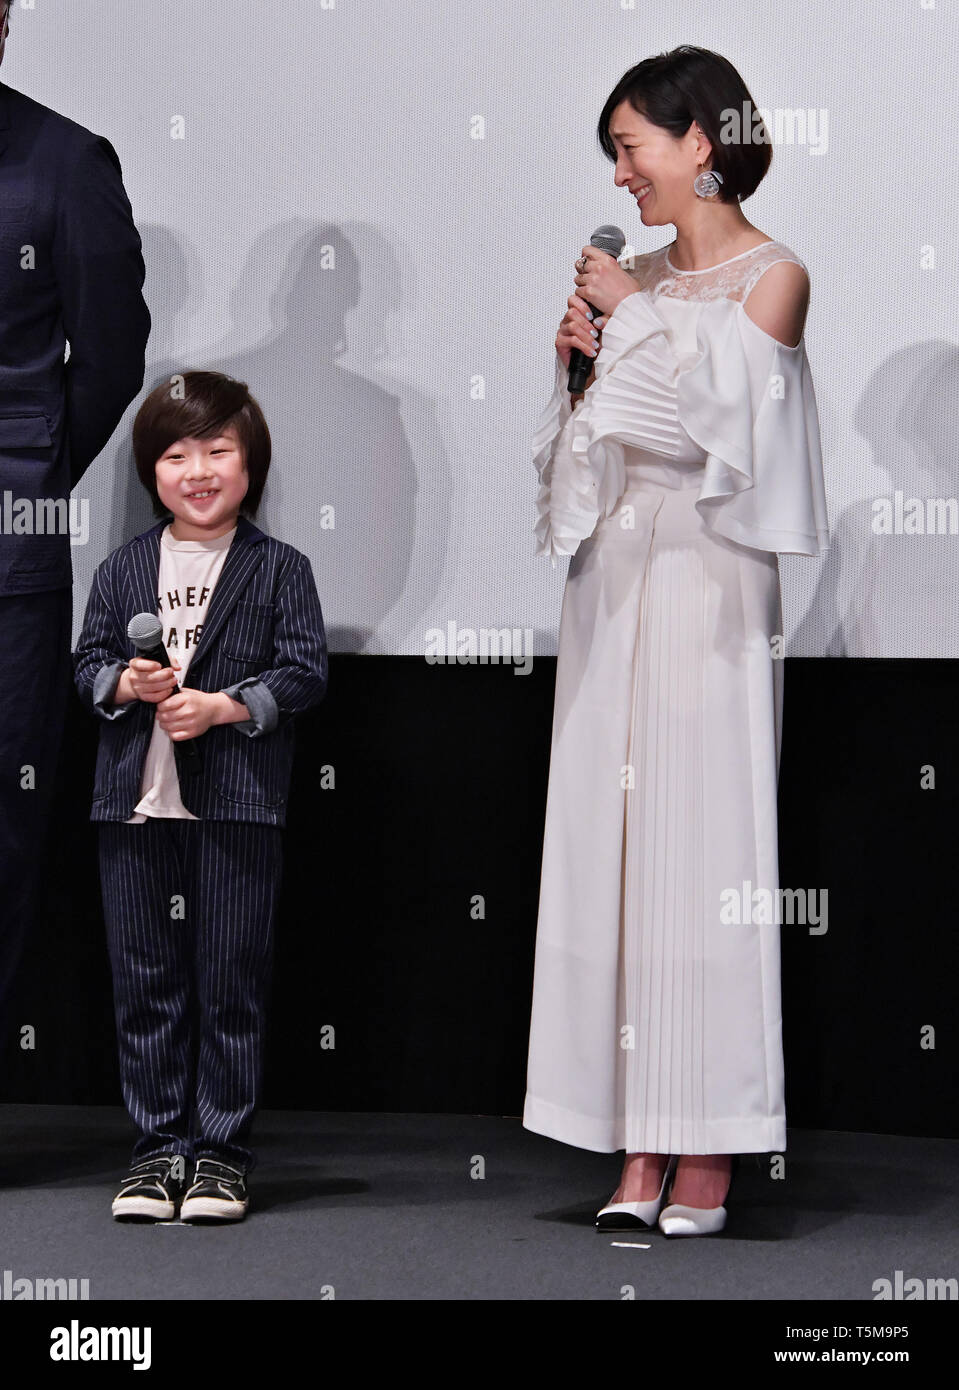 Japanese actress Ryoko Hirosue attends a press conference for "The House of the Sun" at United cinema Toyosu in Tokyo, Japan on April 25, 2019. Credit: AFLO/Alamy Live News Stock Photo